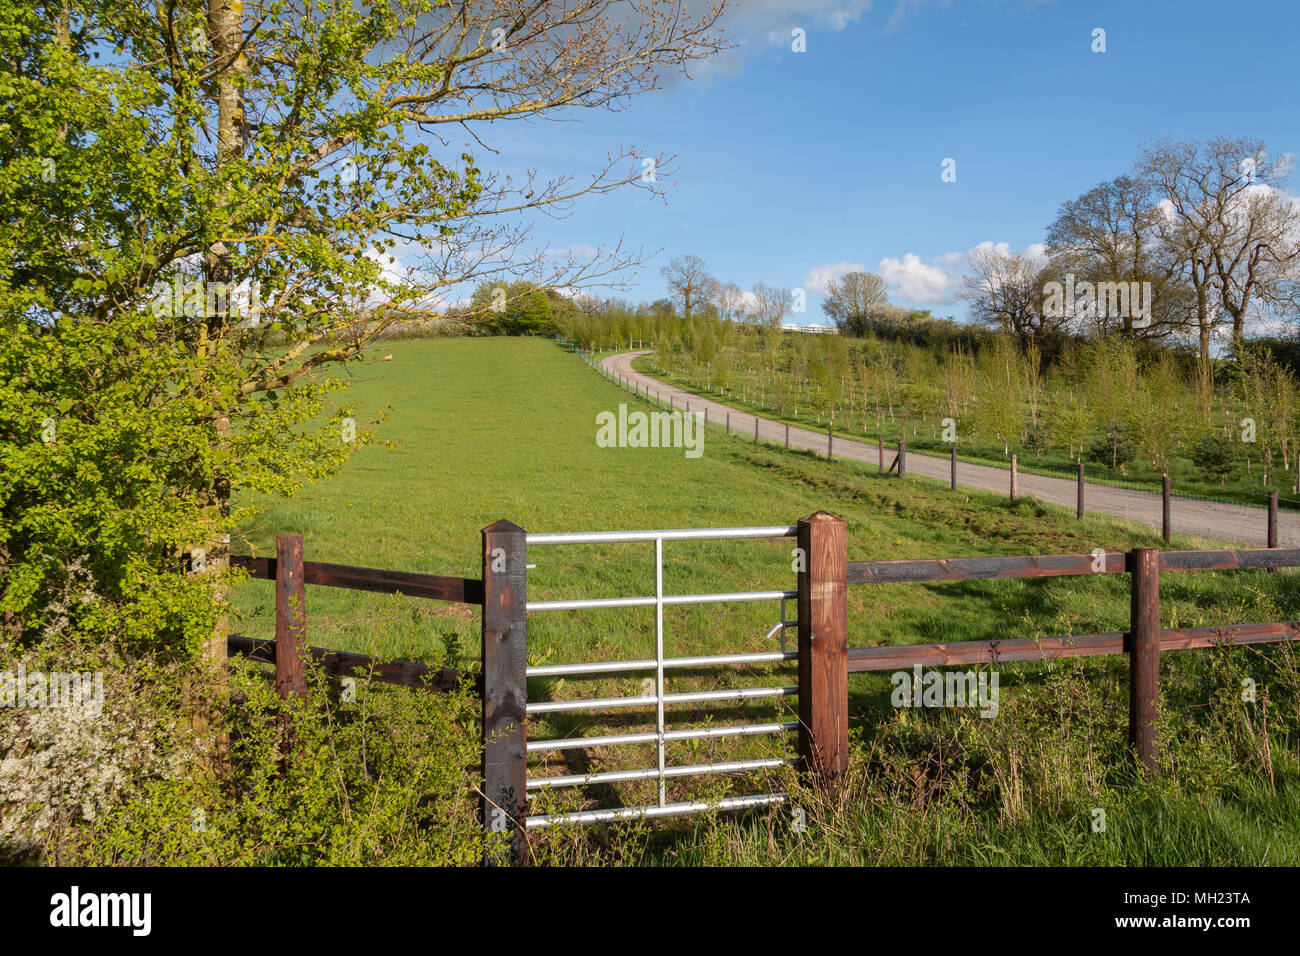 An image of a metal gate with wooden posts and fence, near Loddington, Leicestershire, England, UK Stock Photo